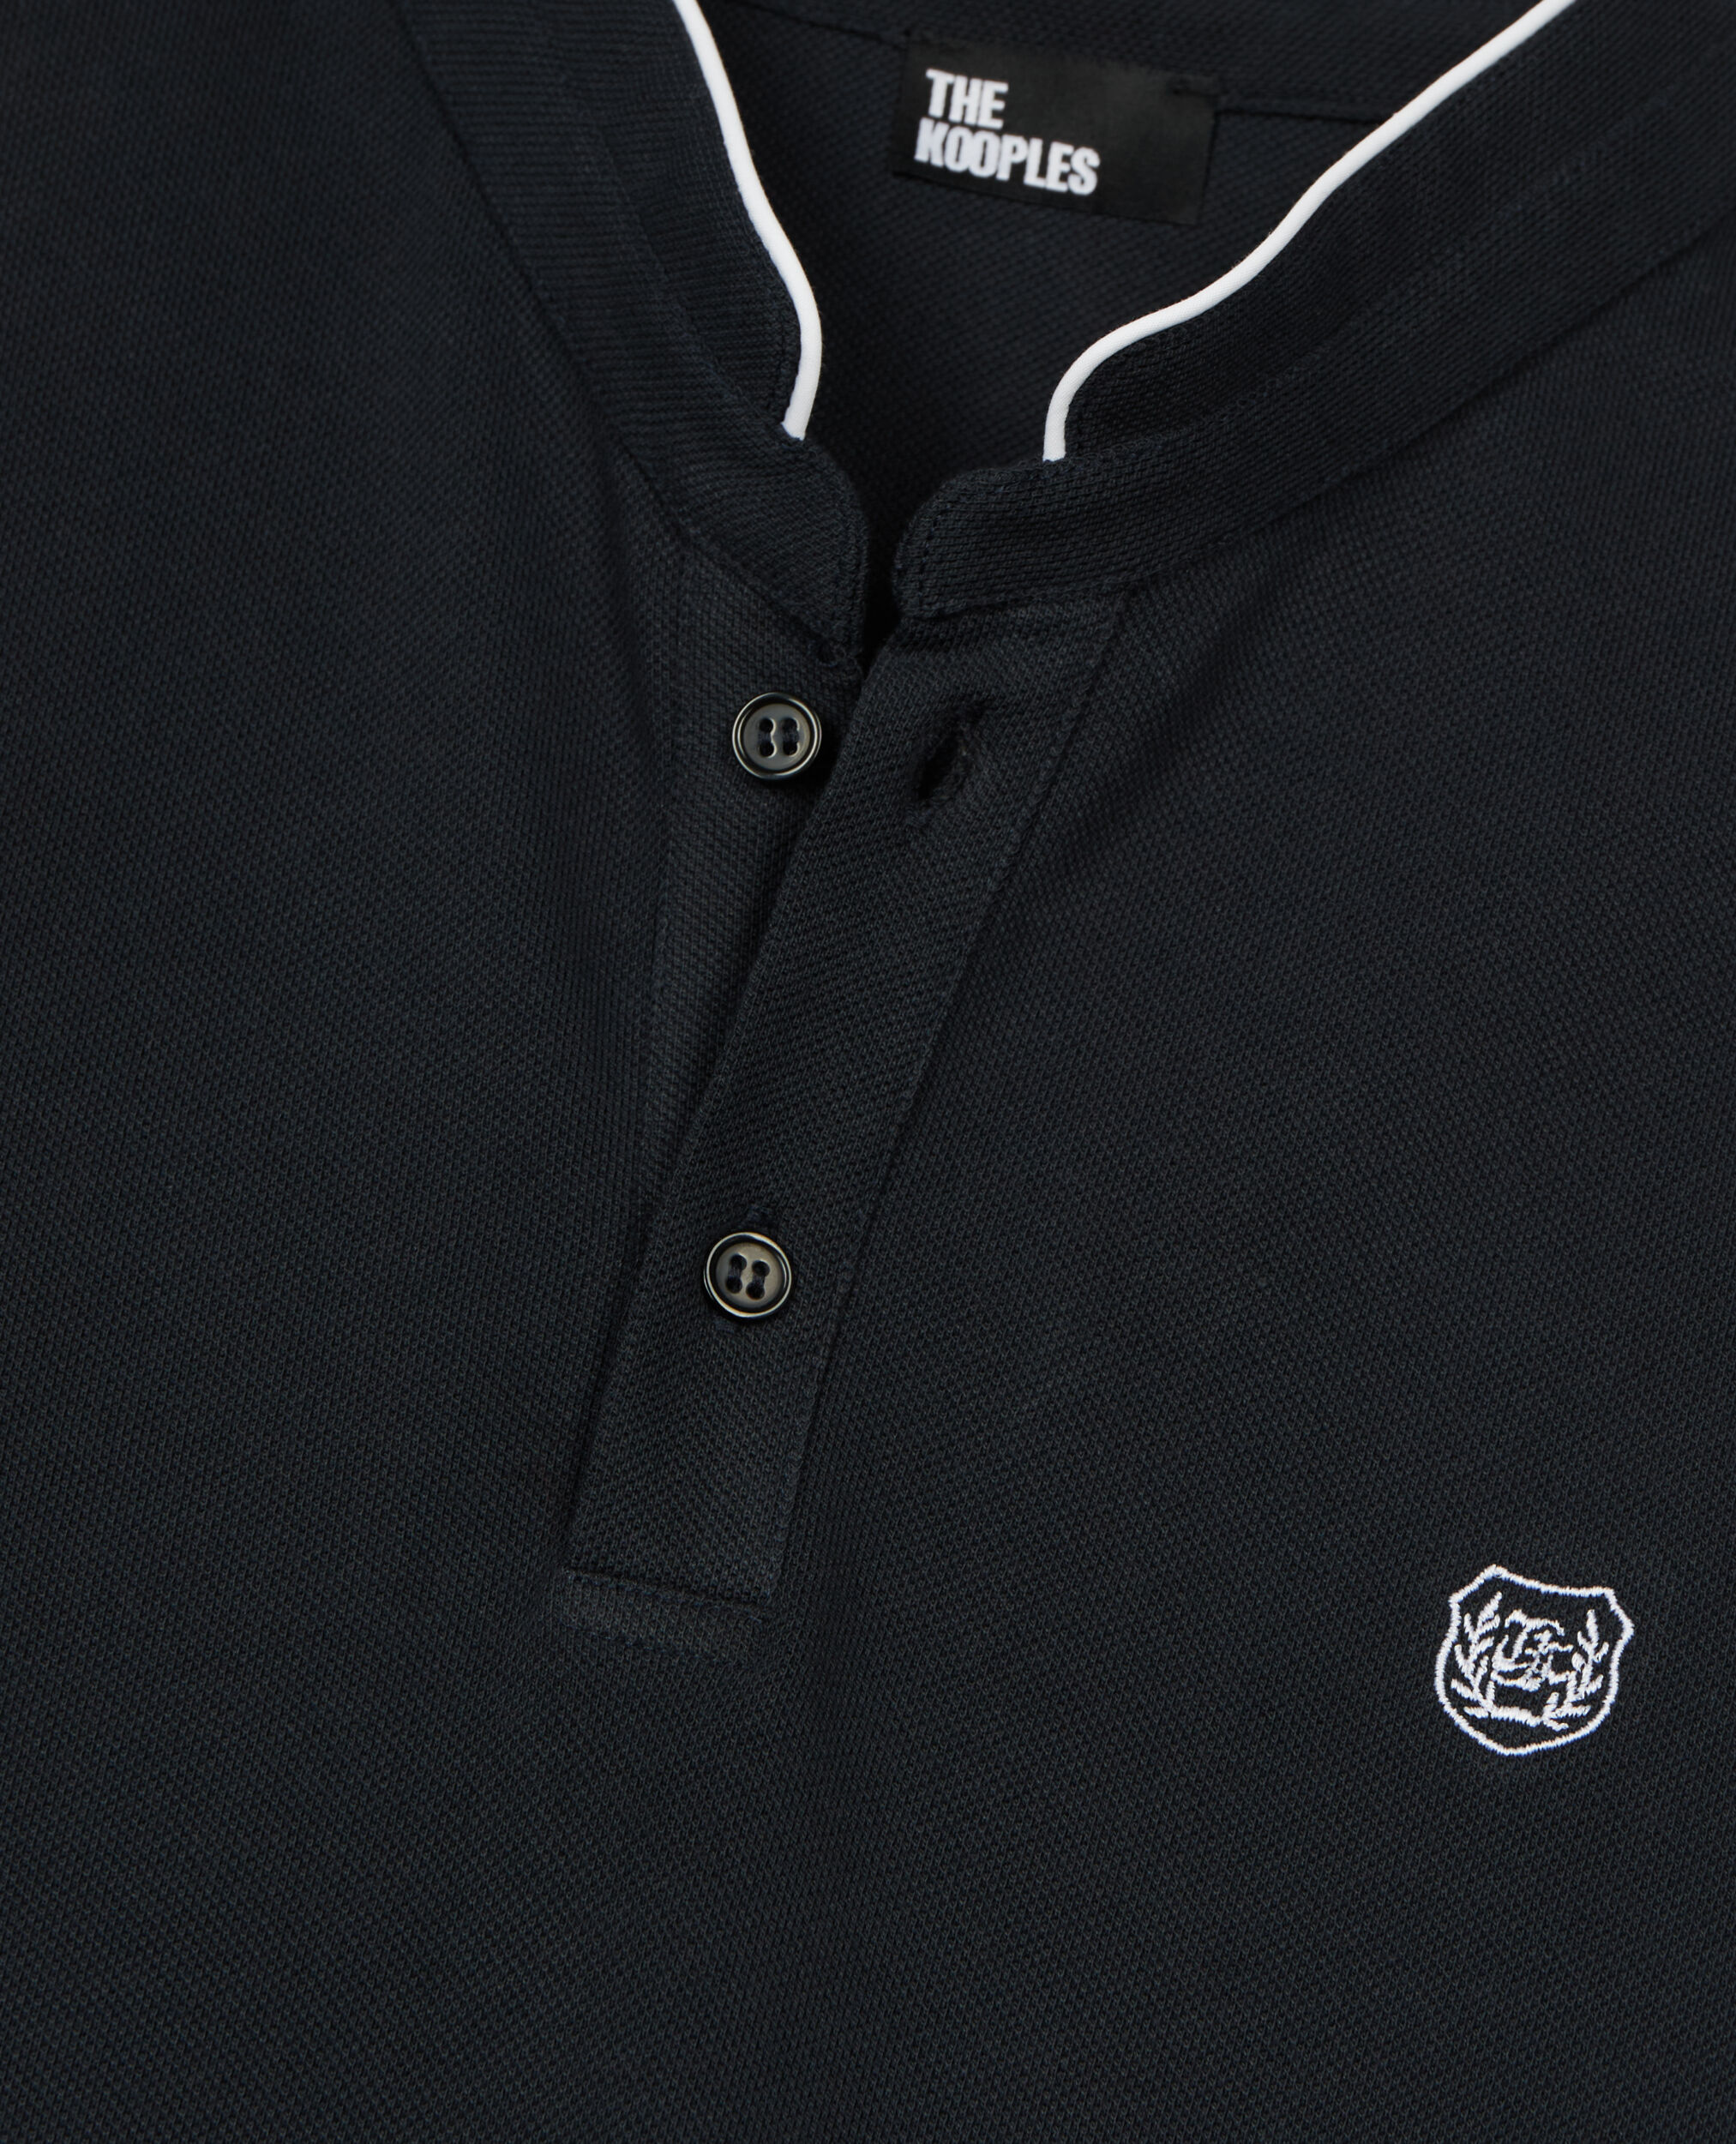 Navy blue pique cotton polo t-shirt, NAVY, hi-res image number null